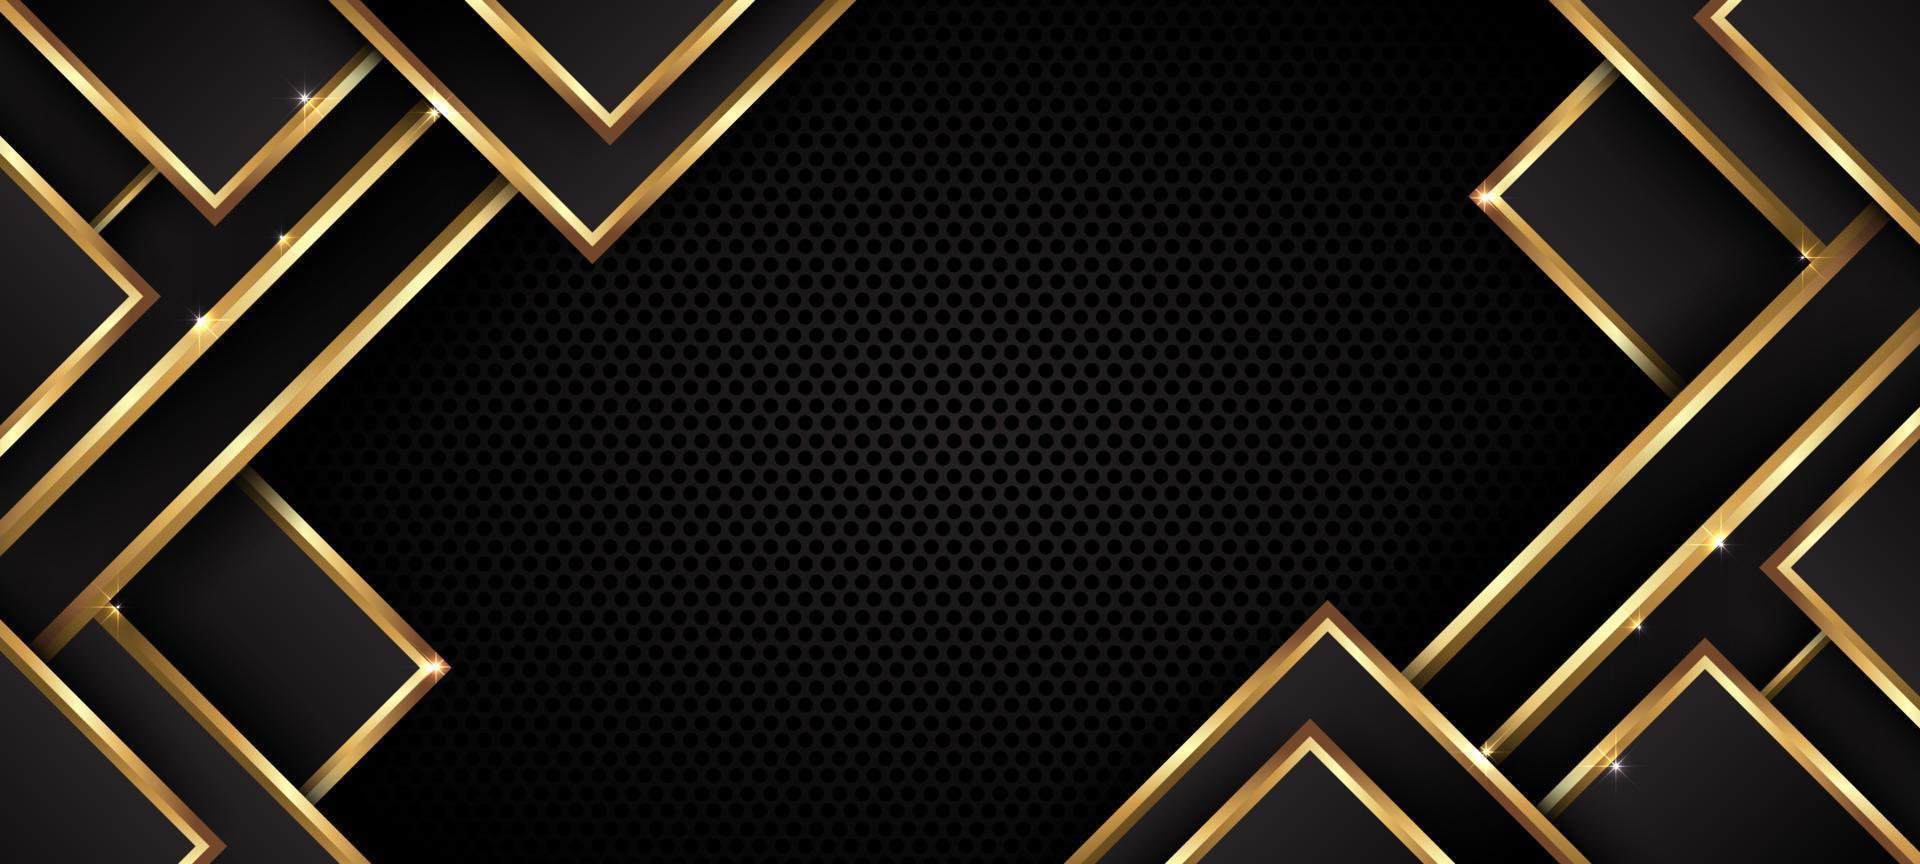 Abstract Black Triangular Background with Gold Lines 14724816